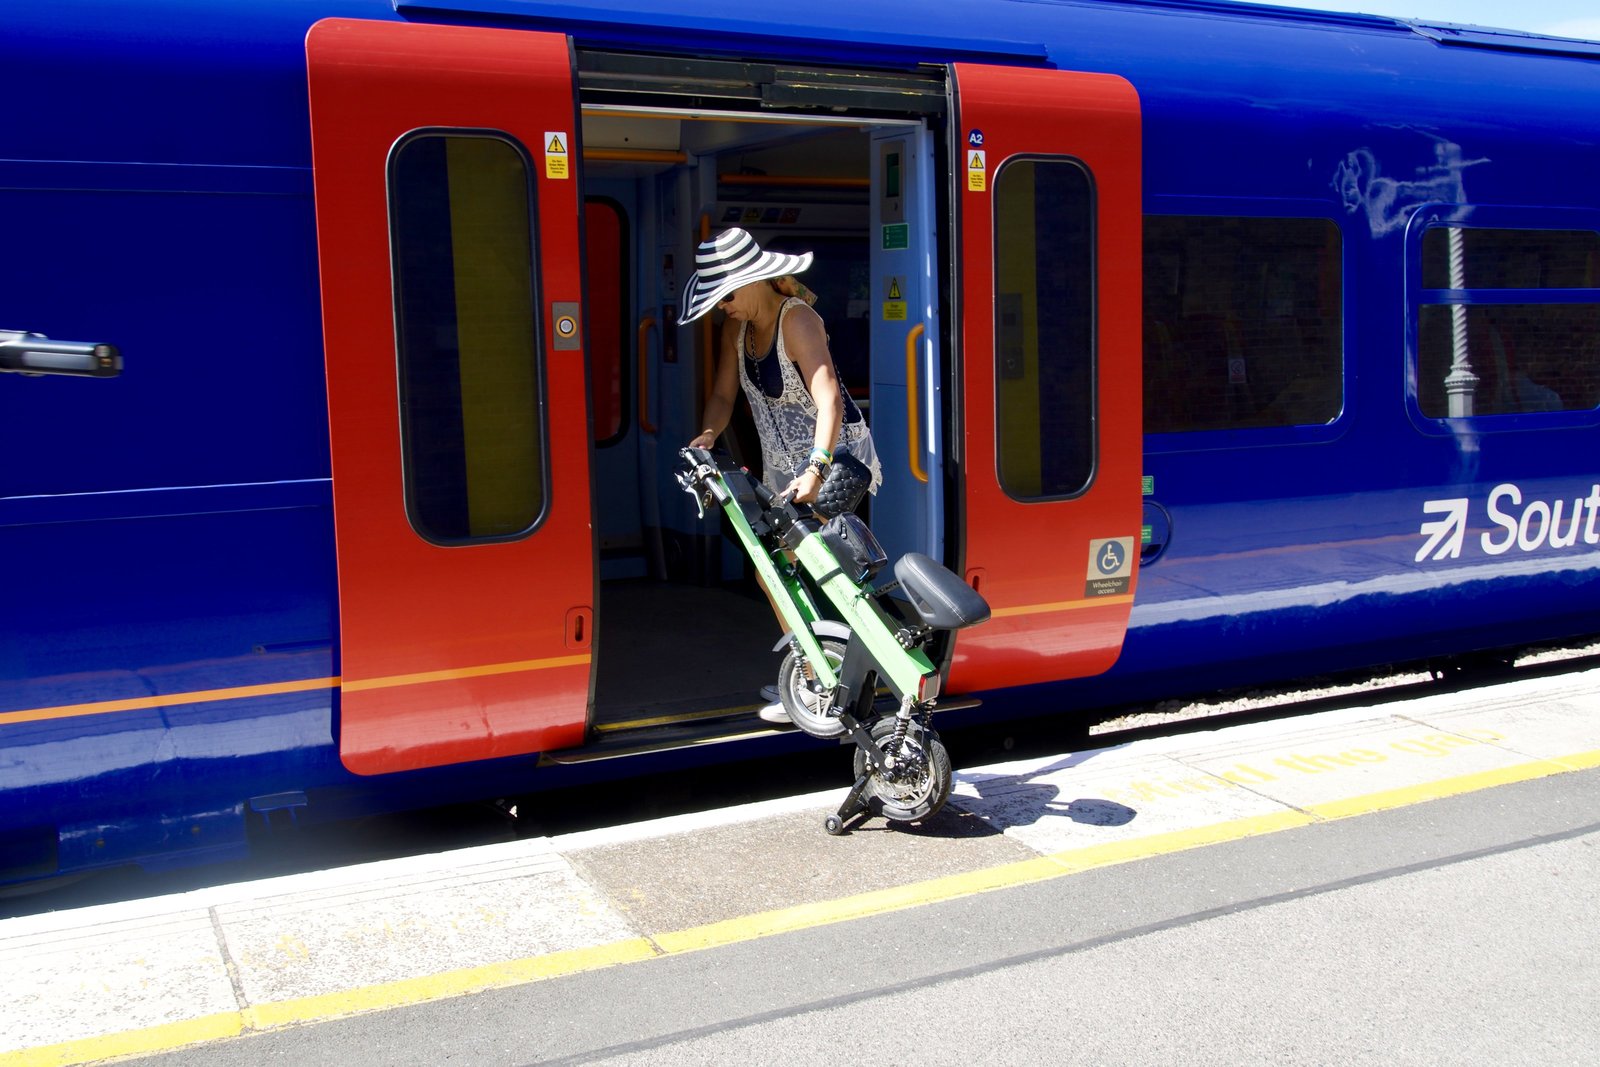 Lady carrying her Green Go-Bike M2 into the train